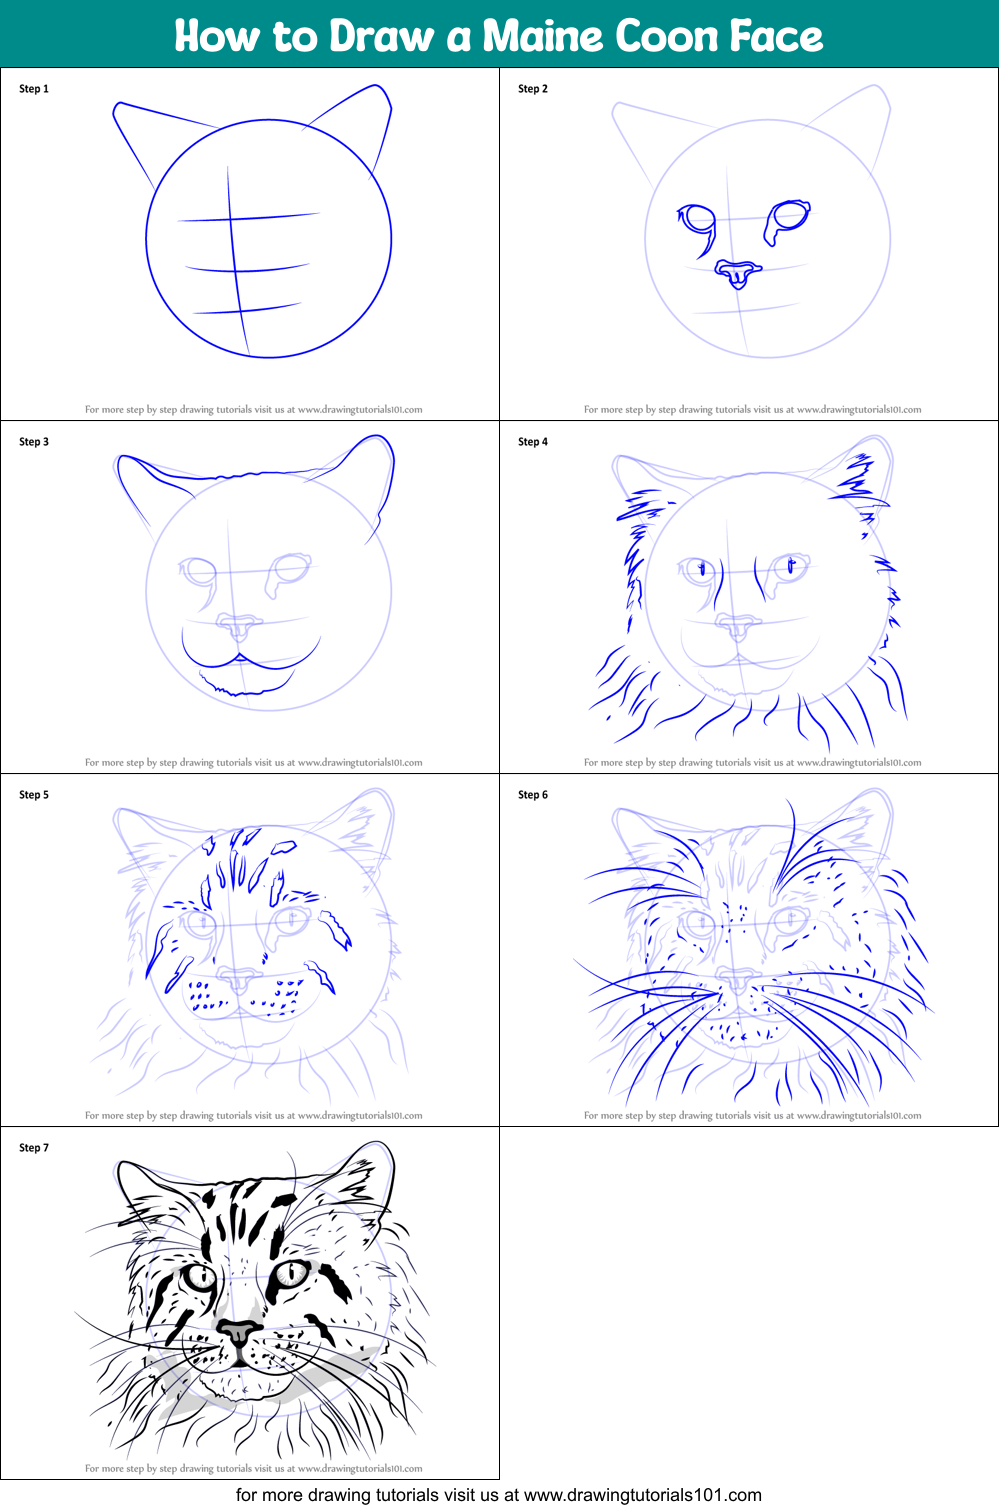 How to Draw a Maine Coon Face printable step by step drawing sheet